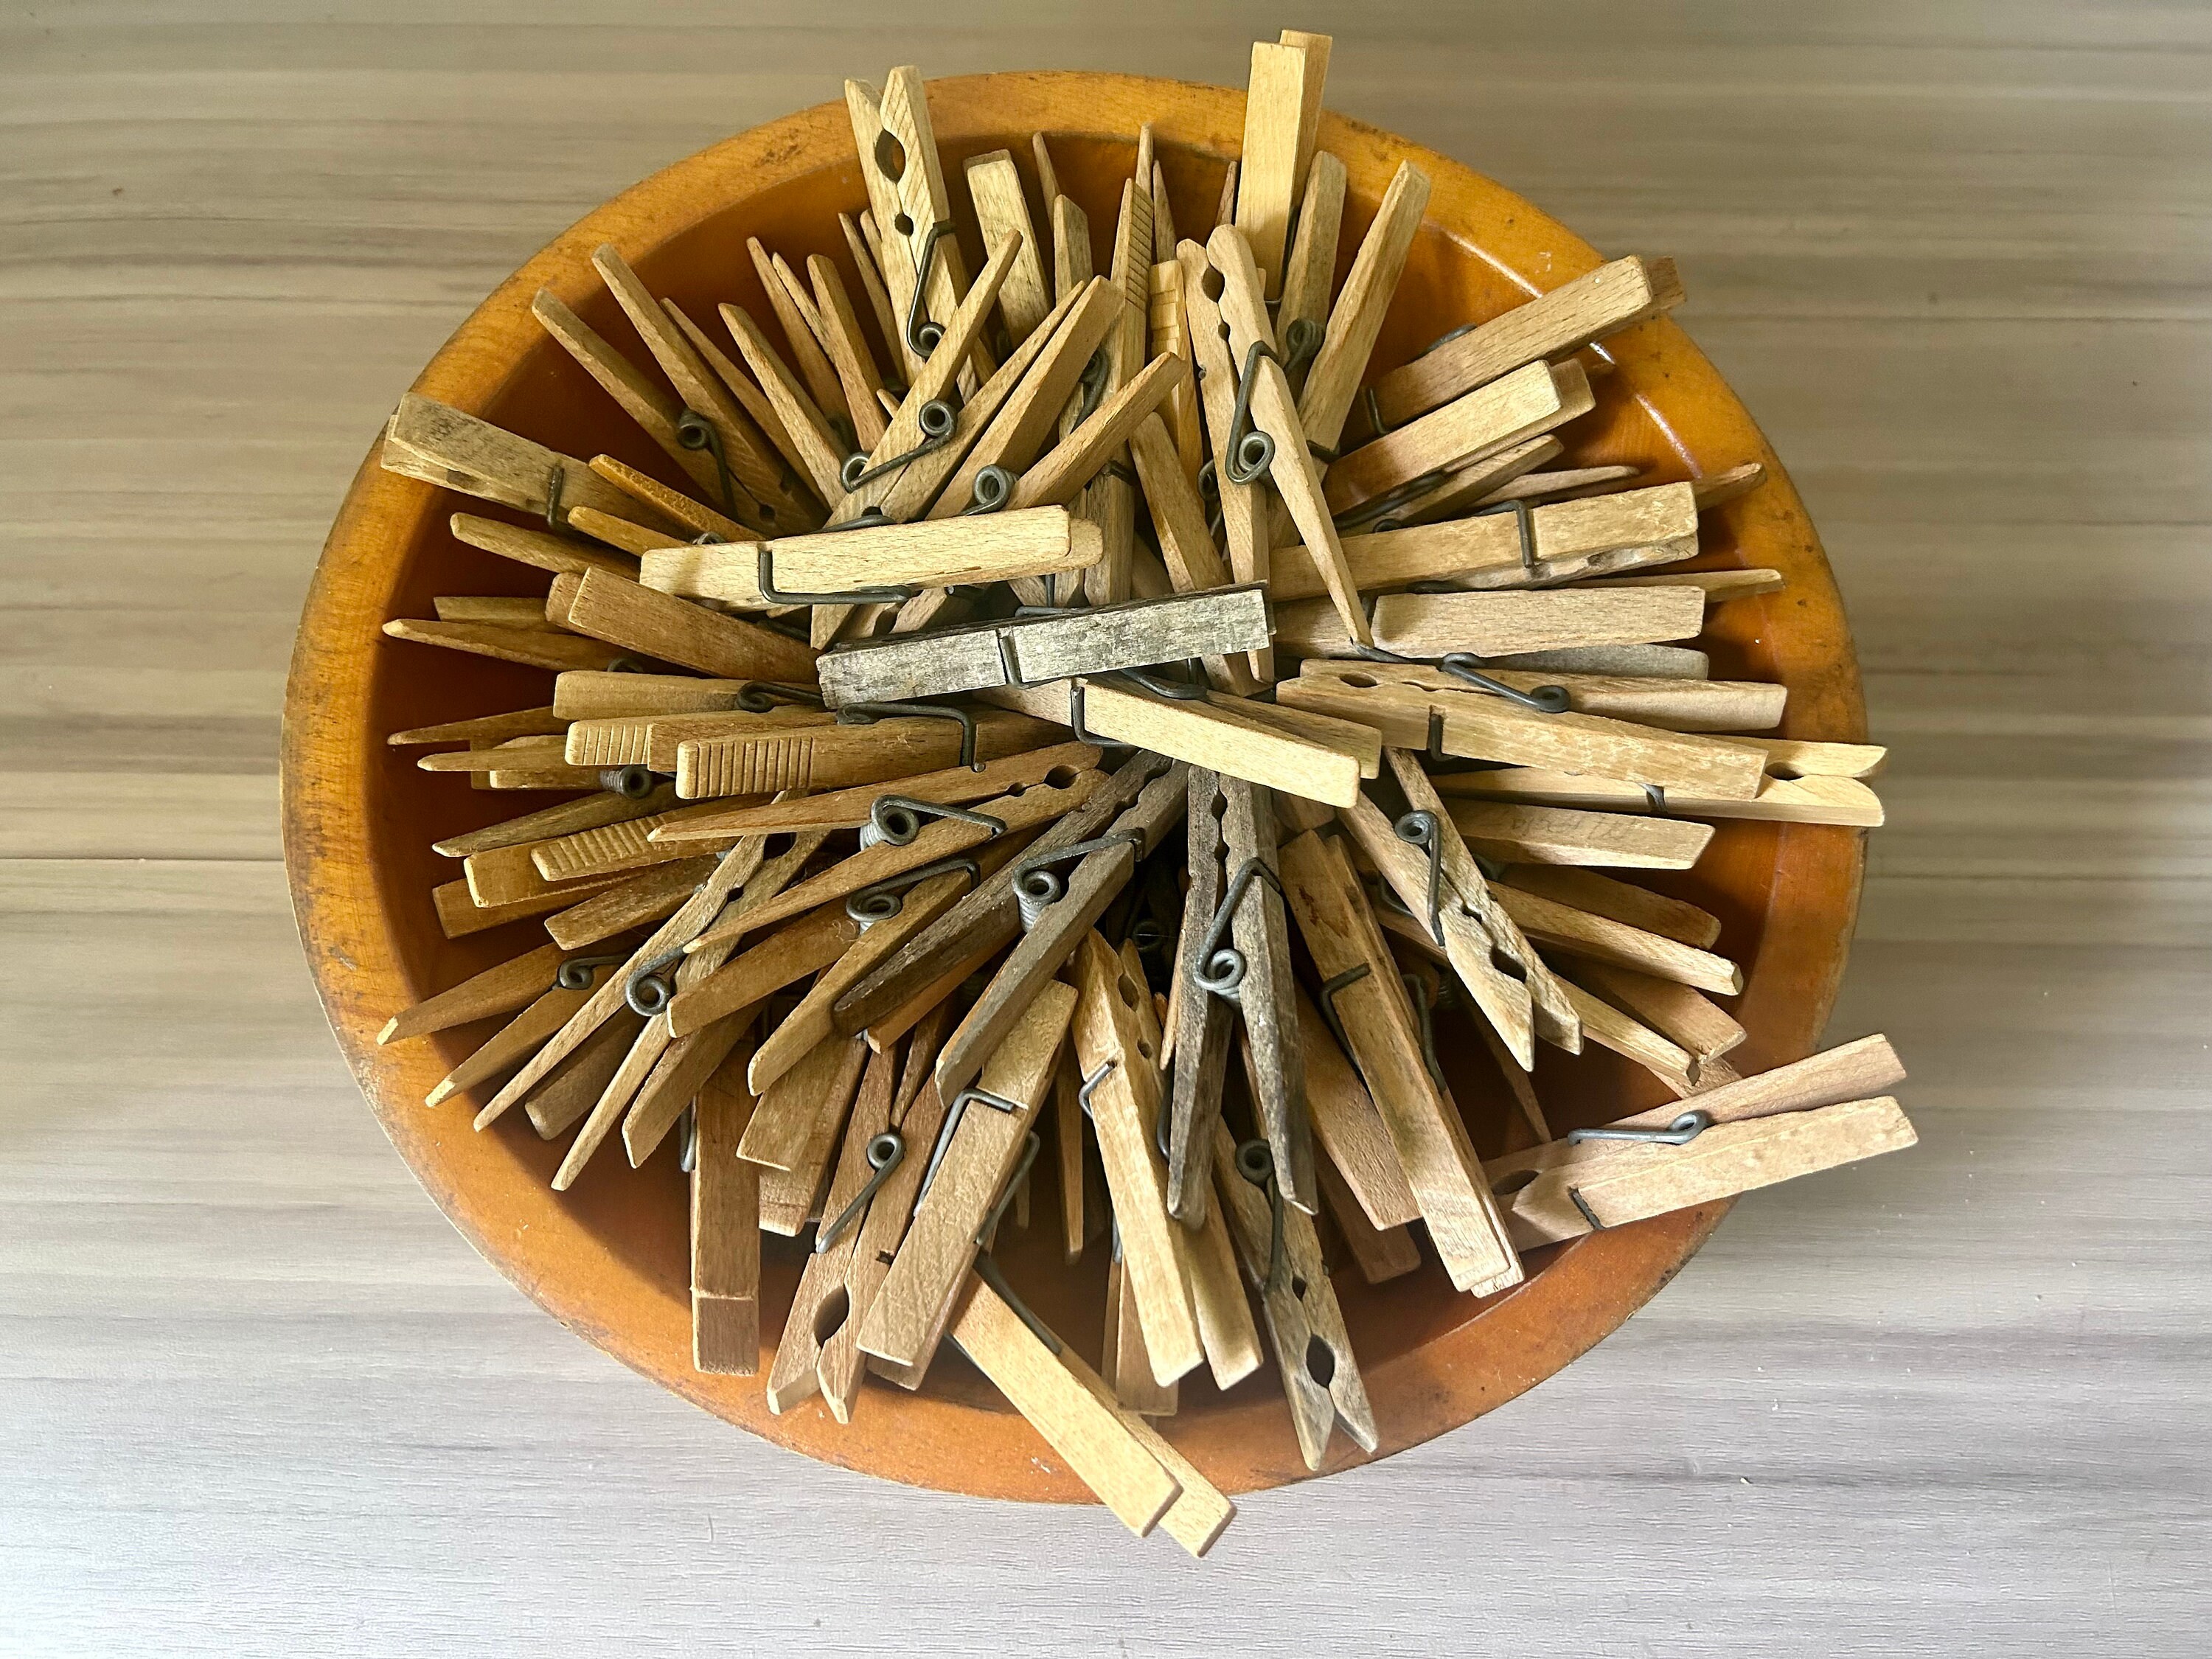 Vintage Wooden Spring Loaded Clothes Pins. Lot of 25 Mid-century